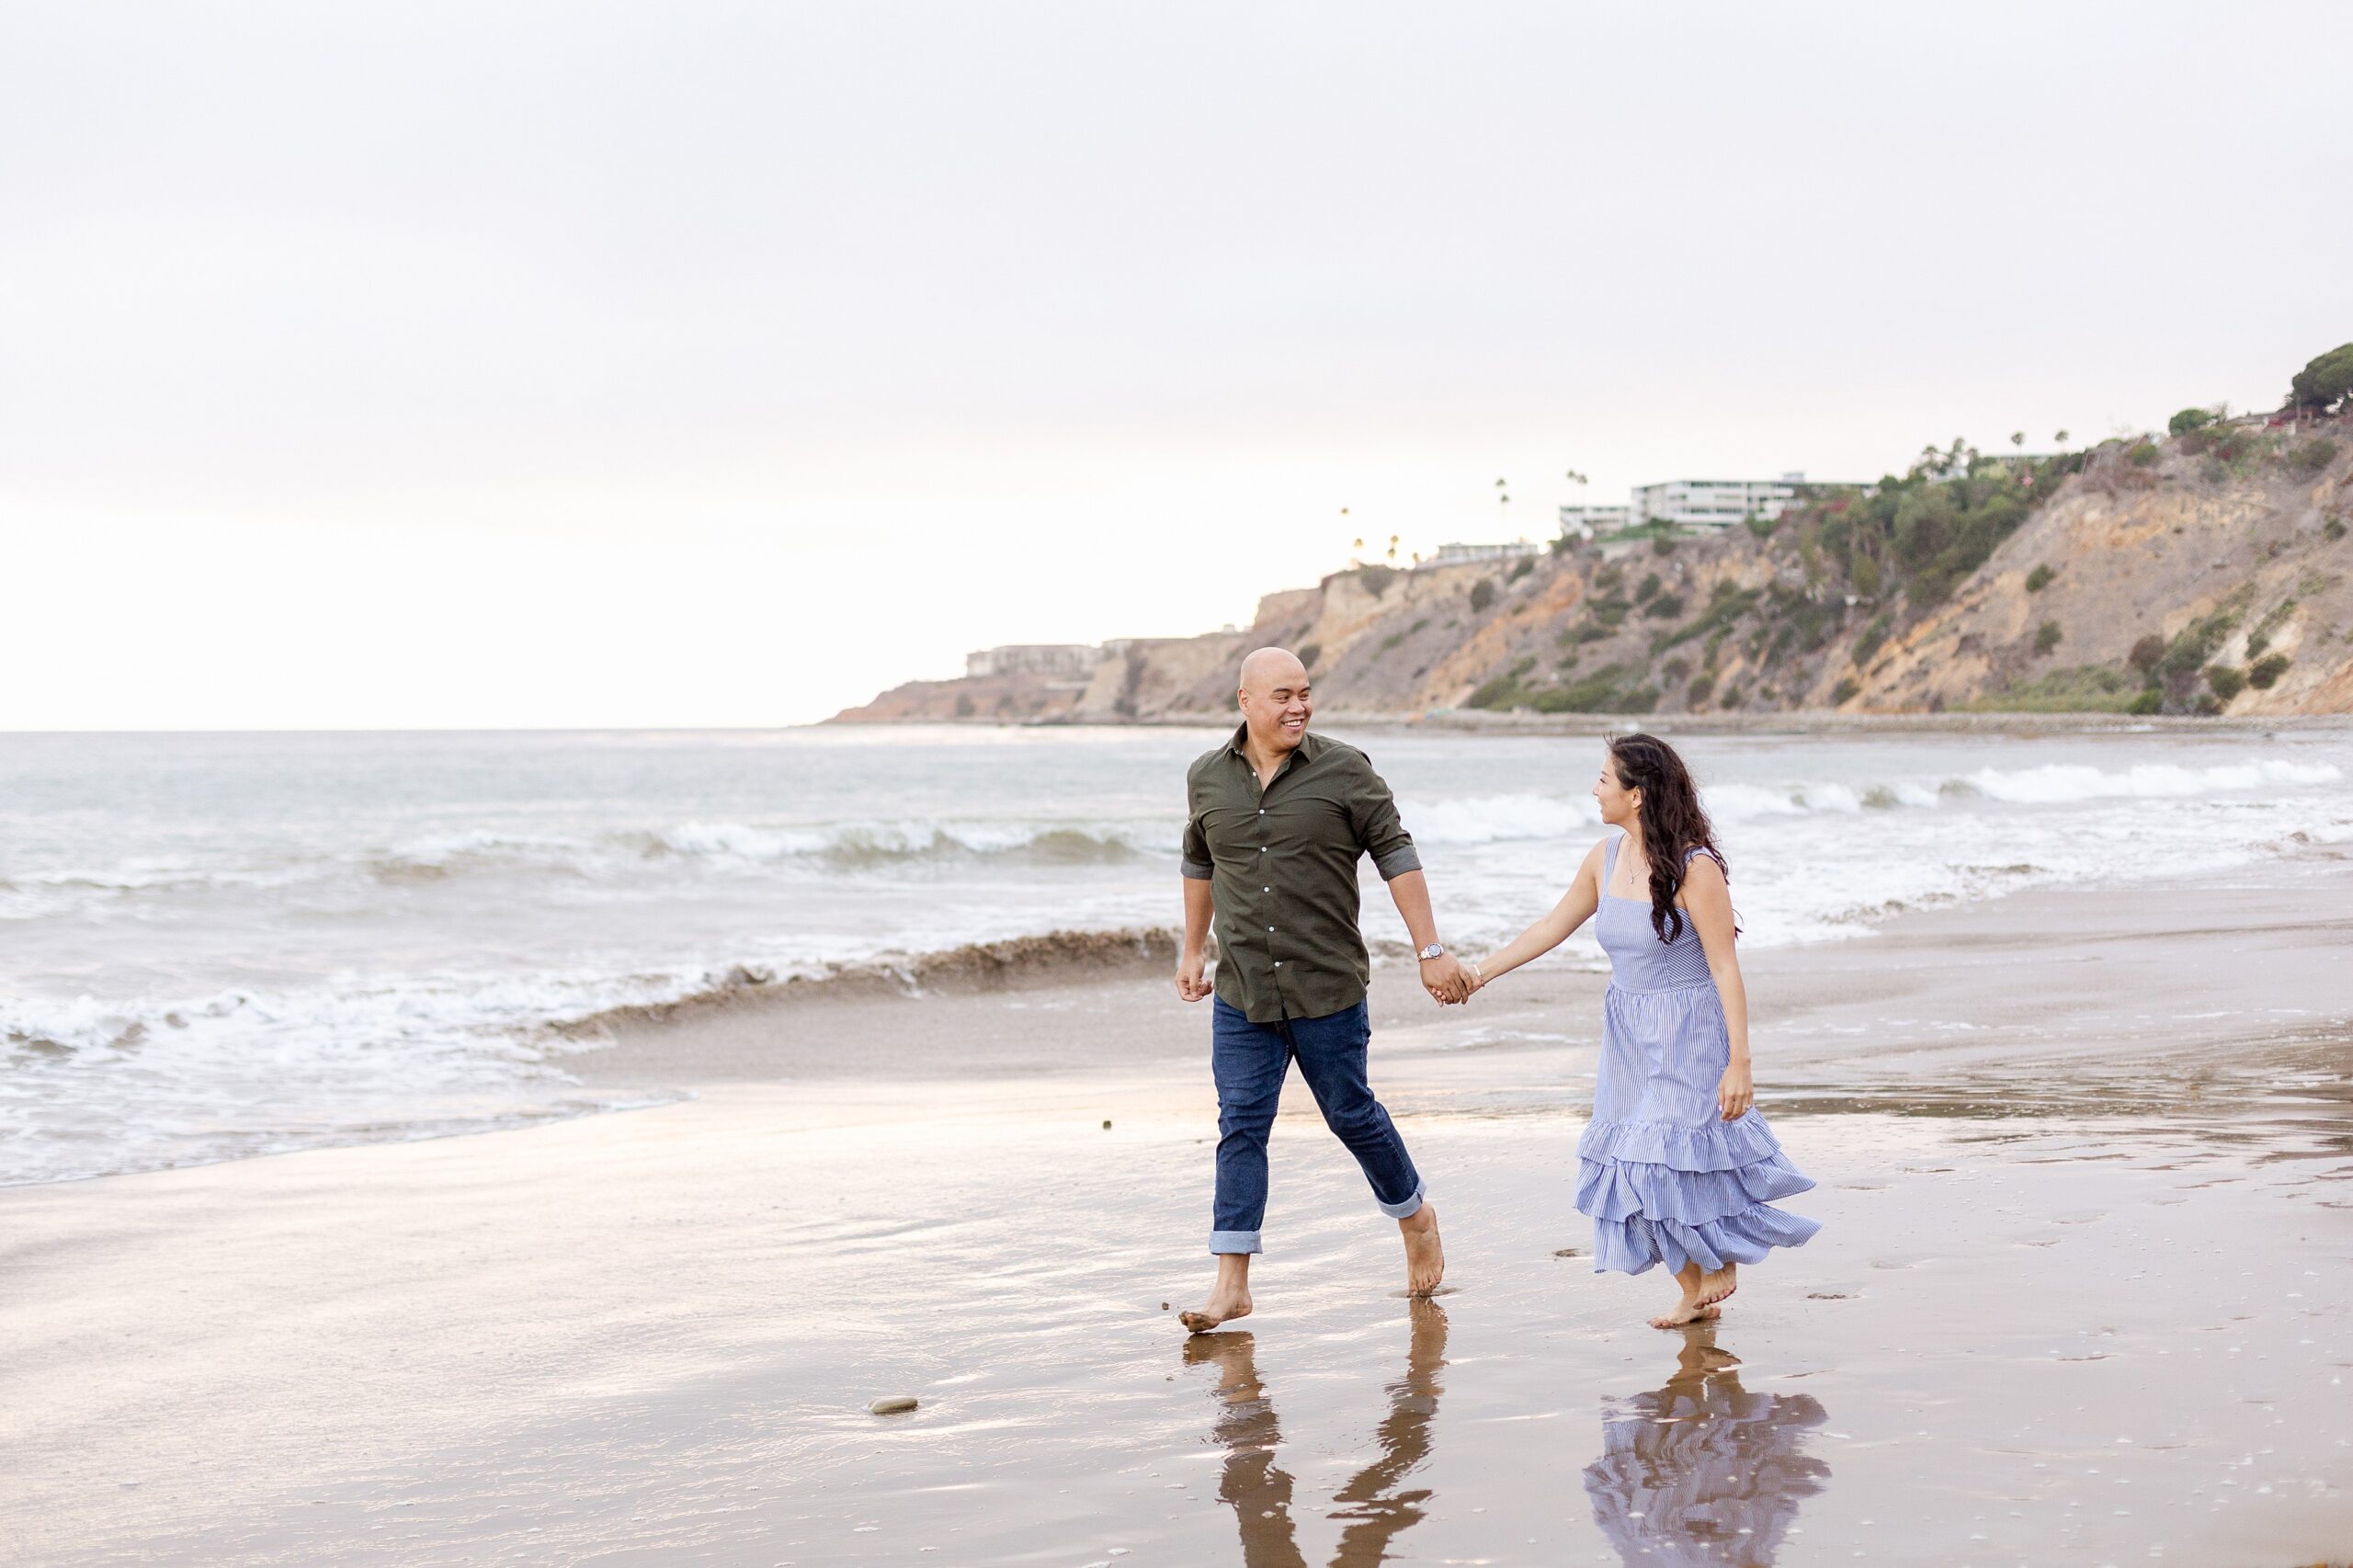 reflection shows in wet sand as couple strolls Abalone Cove for their engagement photos